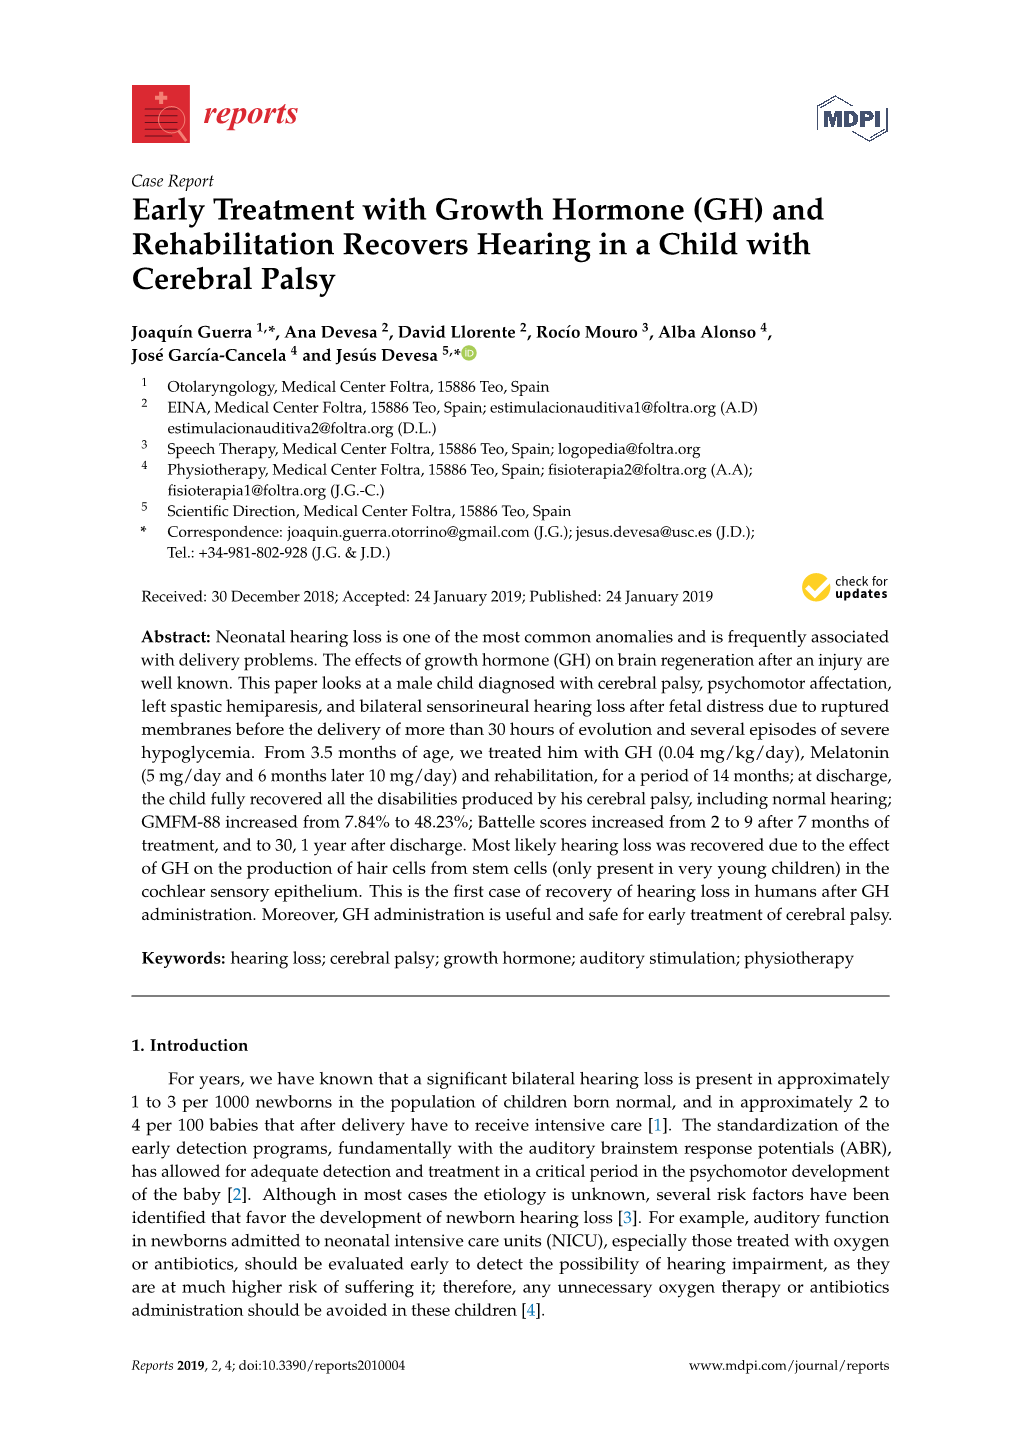 Early Treatment with Growth Hormone (GH) and Rehabilitation Recovers Hearing in a Child with Cerebral Palsy